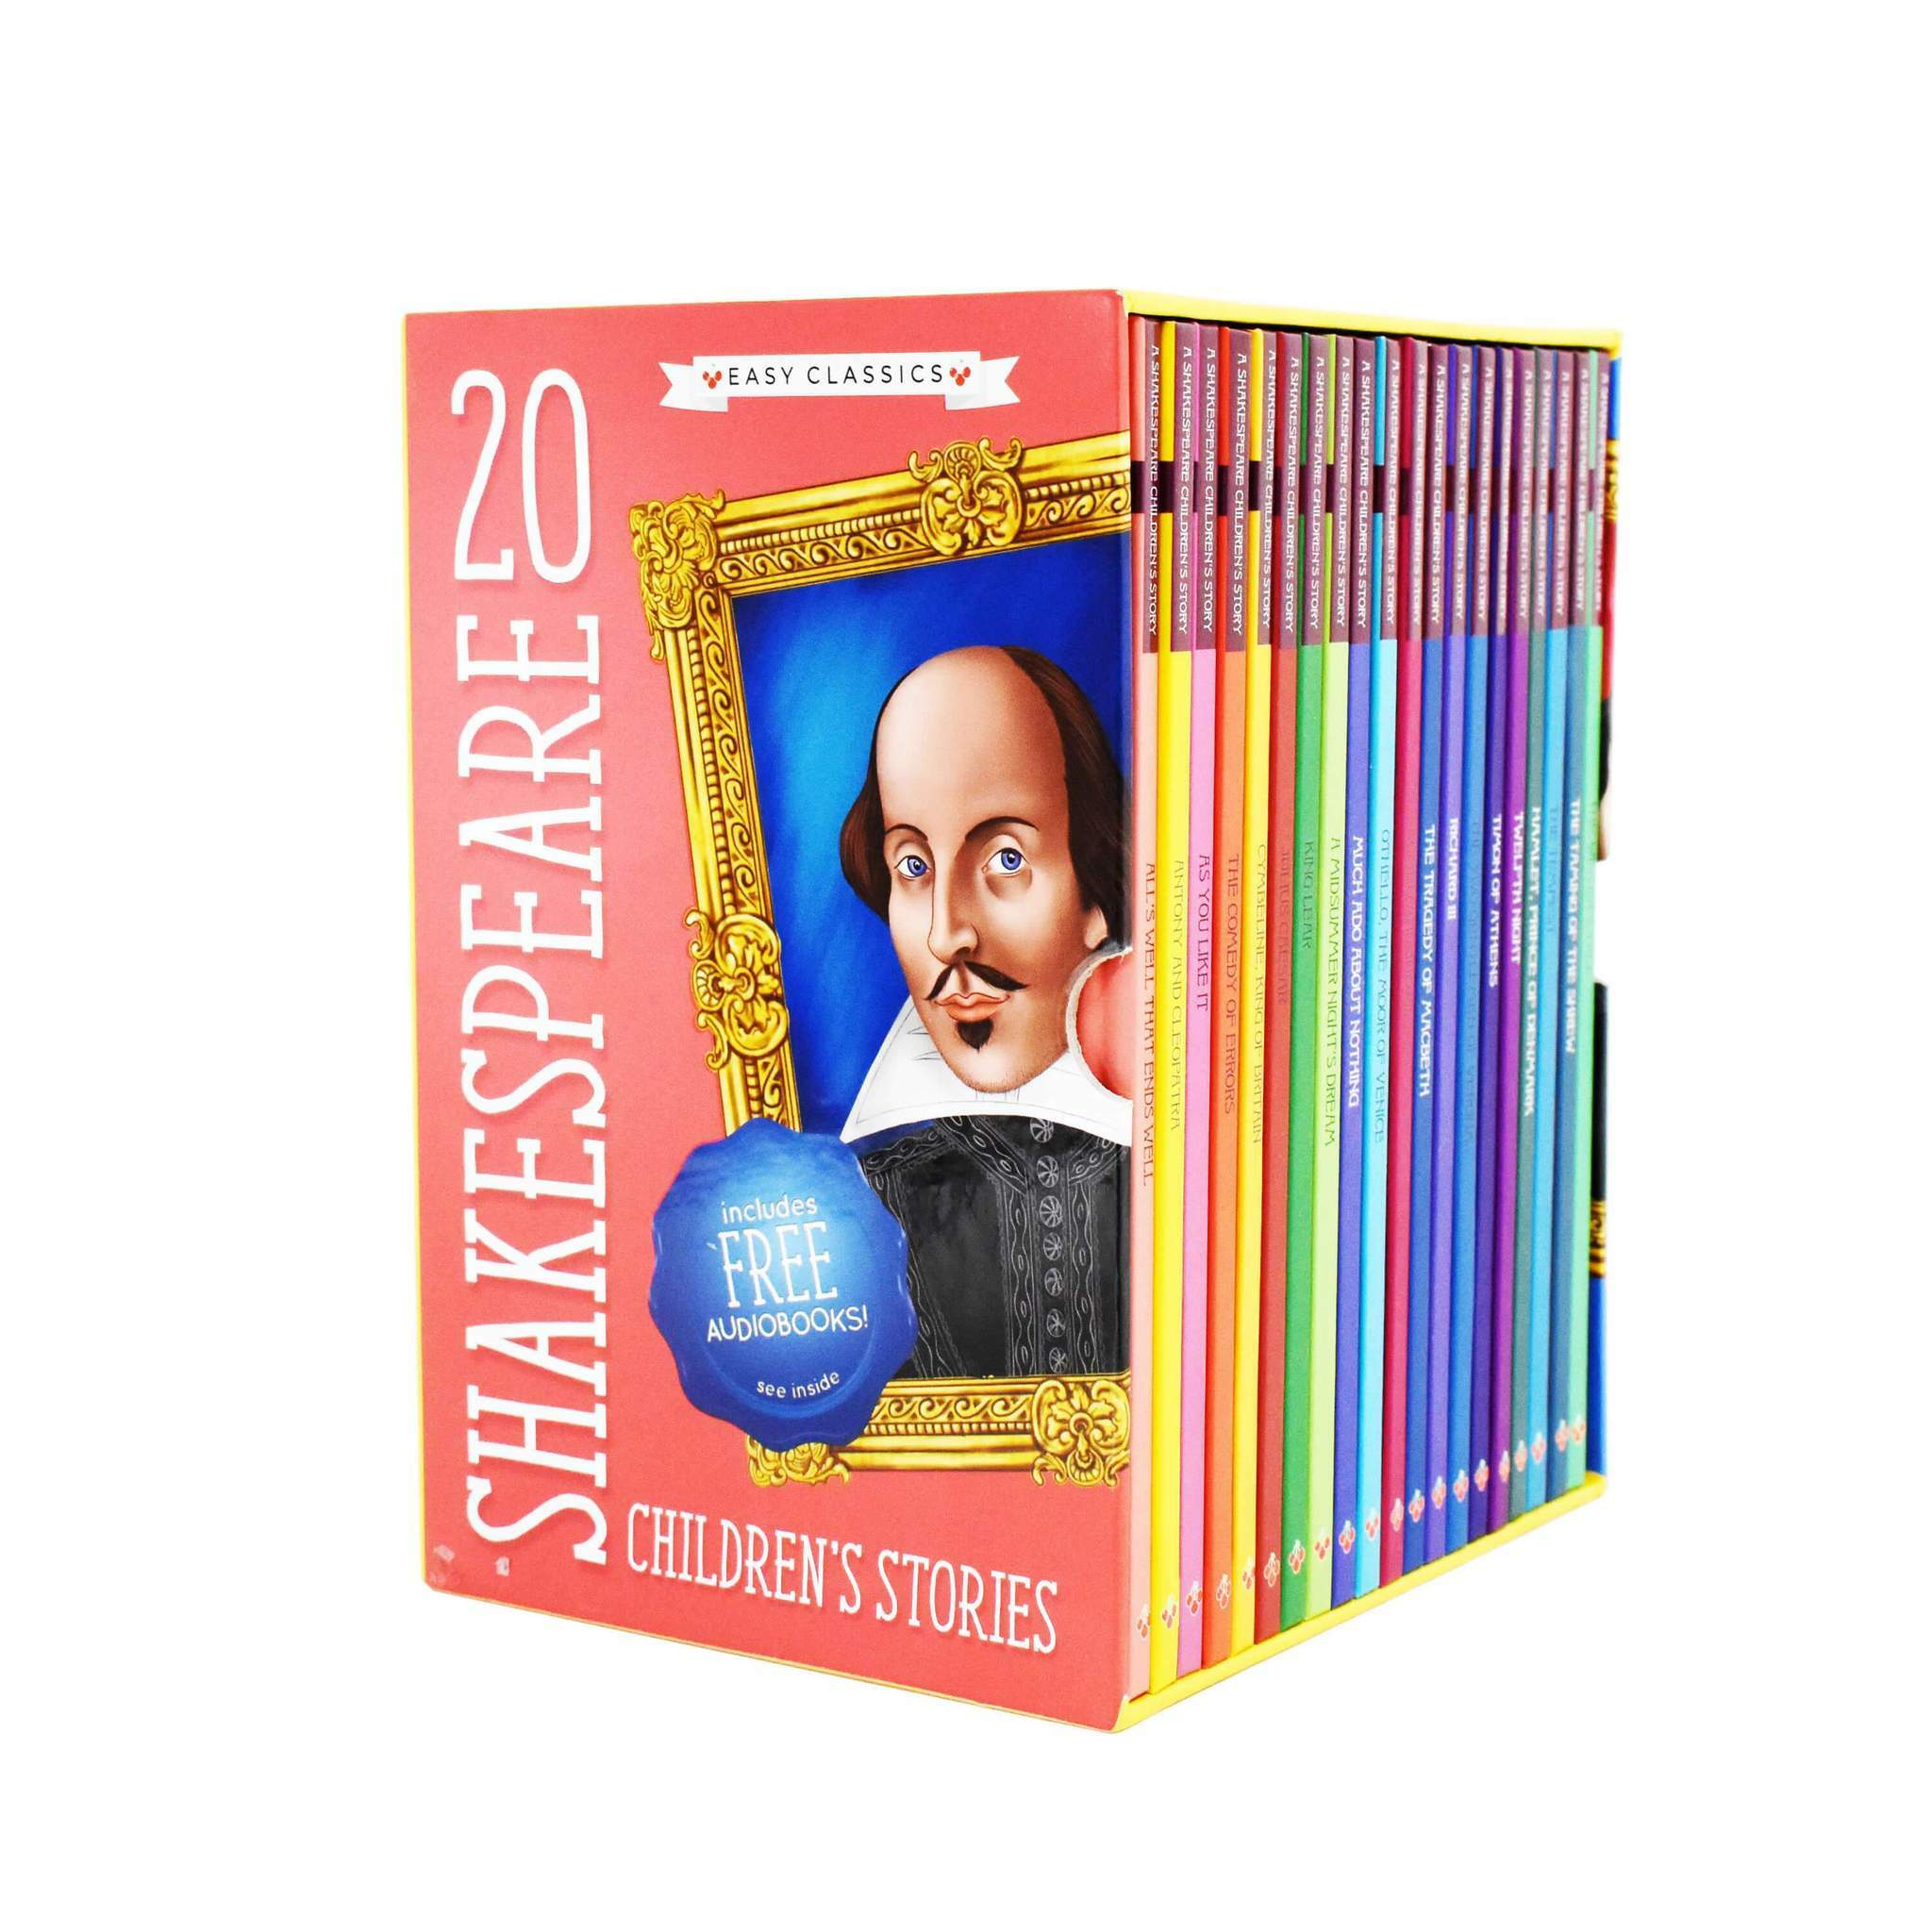 20 Shakespeare Childrens Stories: The Complete Collection (Easy Classics) (Boxed pack, Hardback, Audio QR Codes)